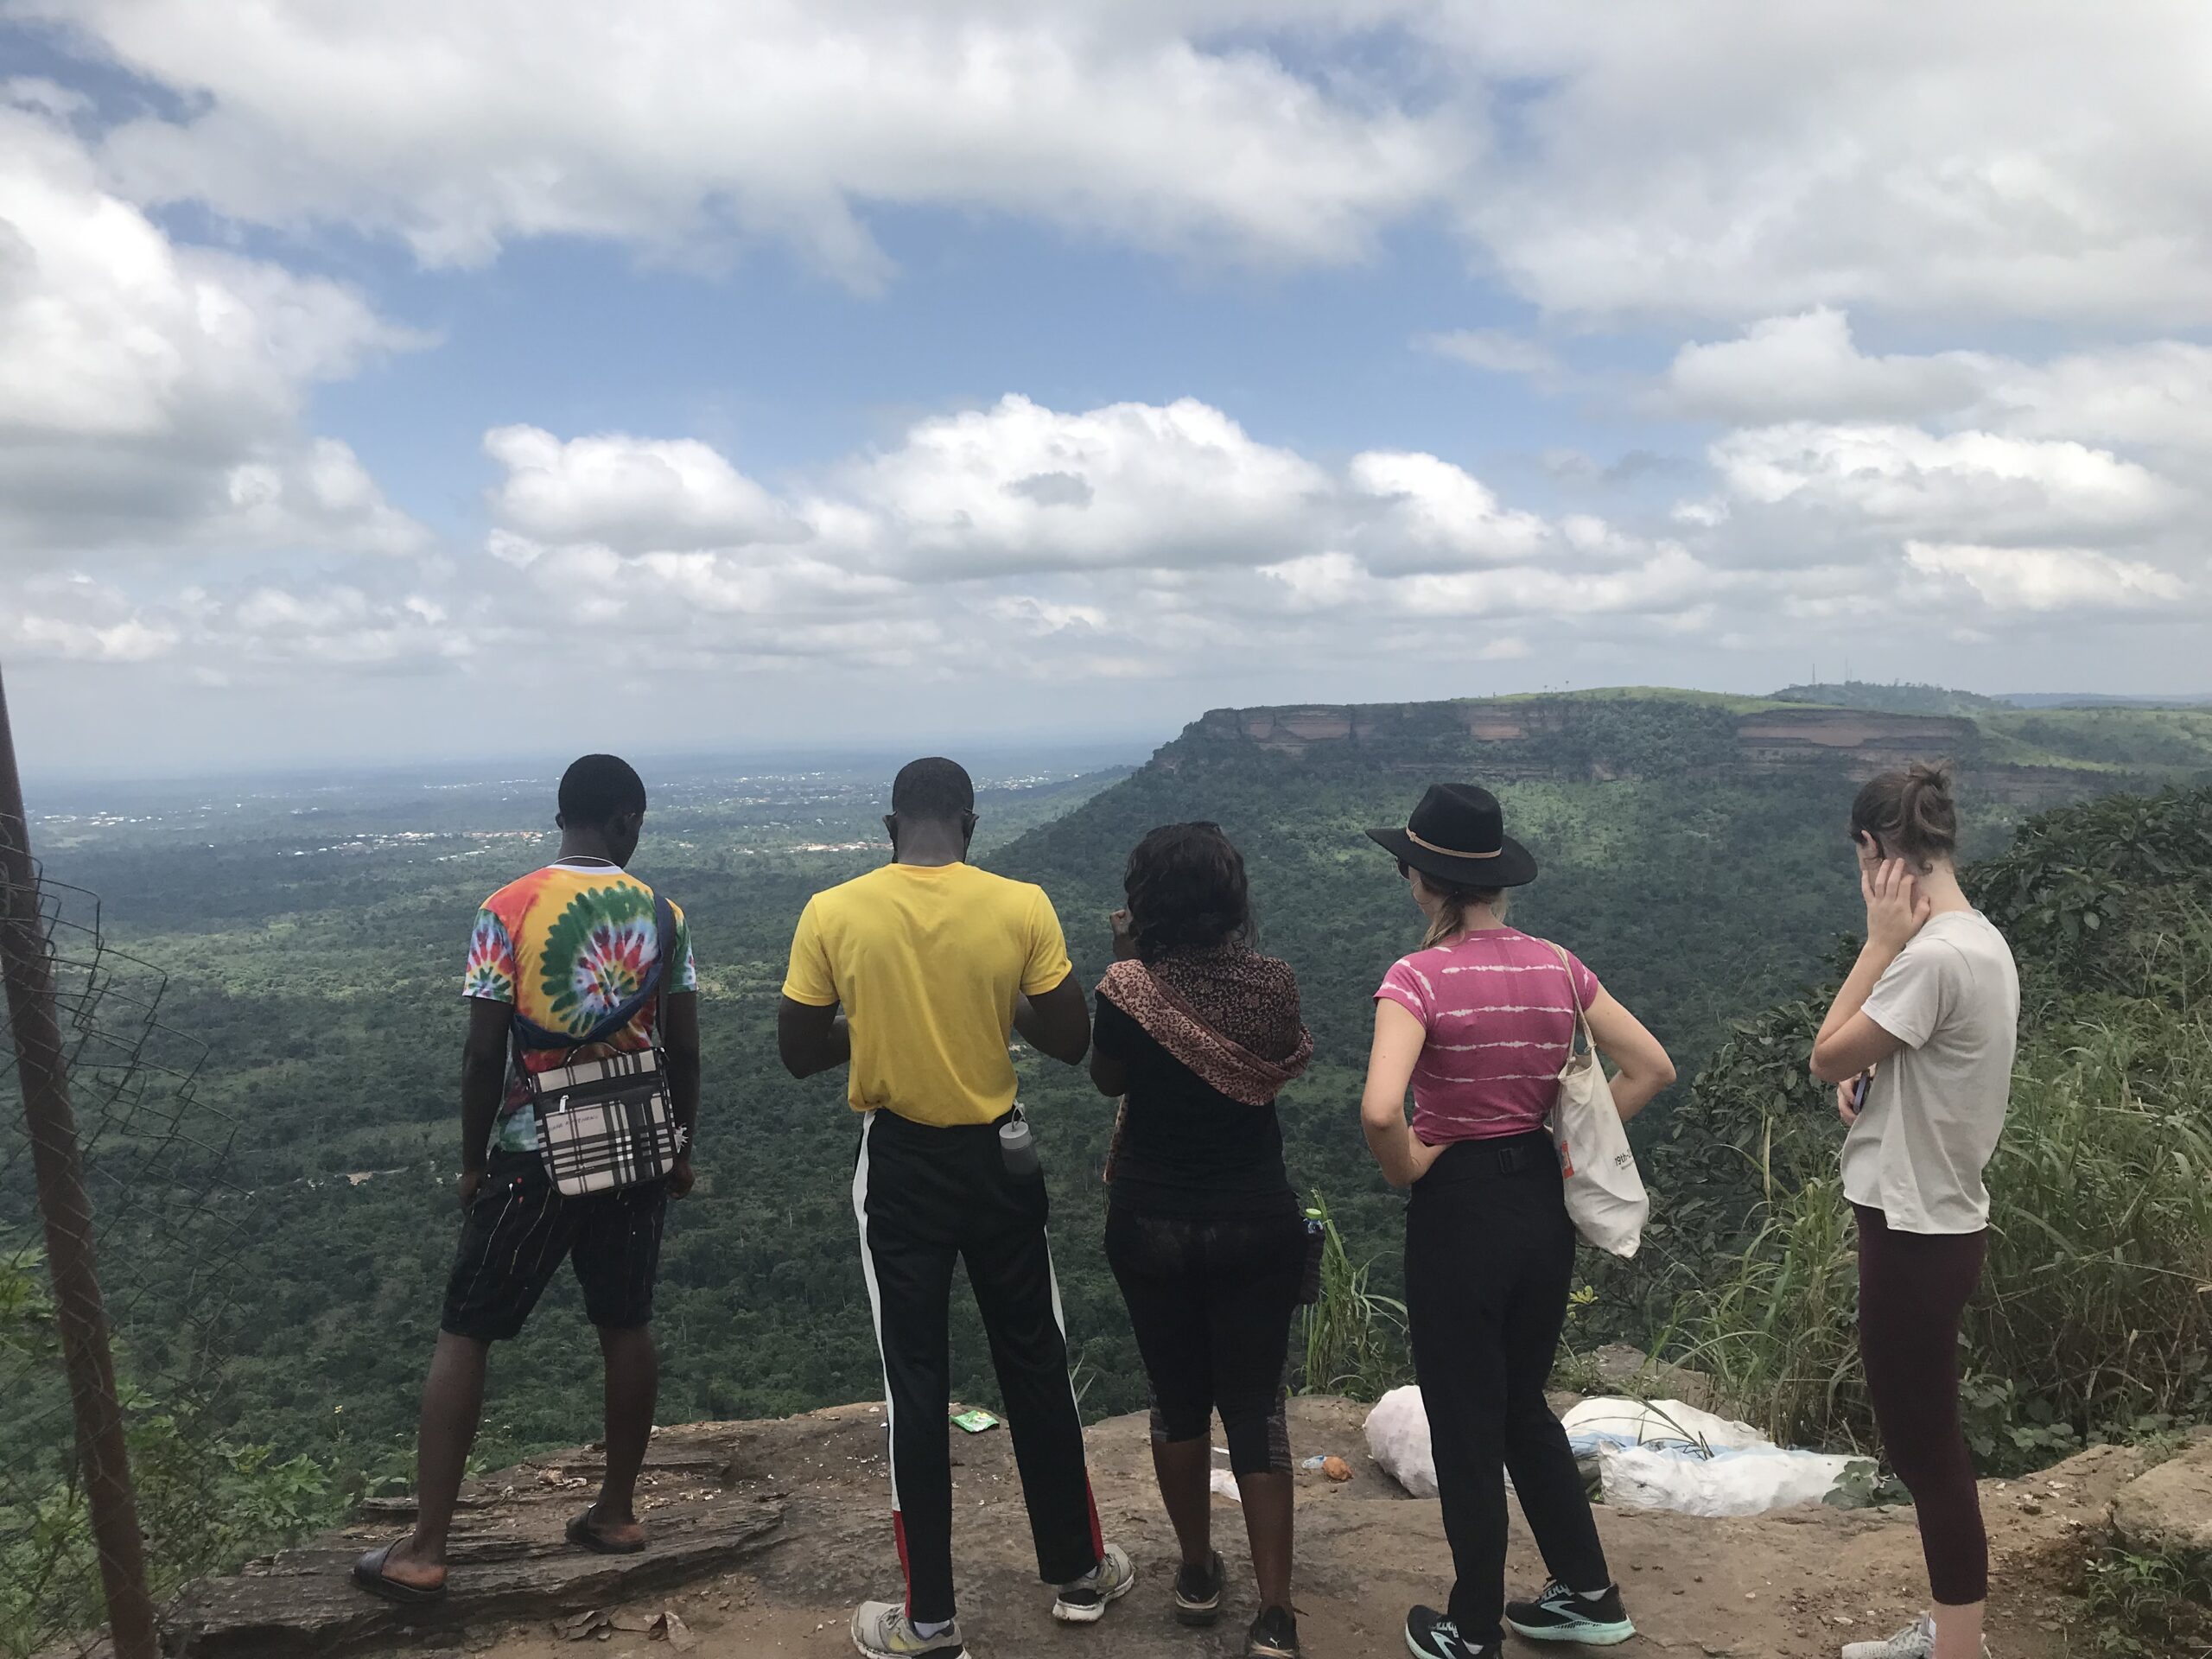 BWO hostel guests are admiring the view from one of the mountains in Ghana